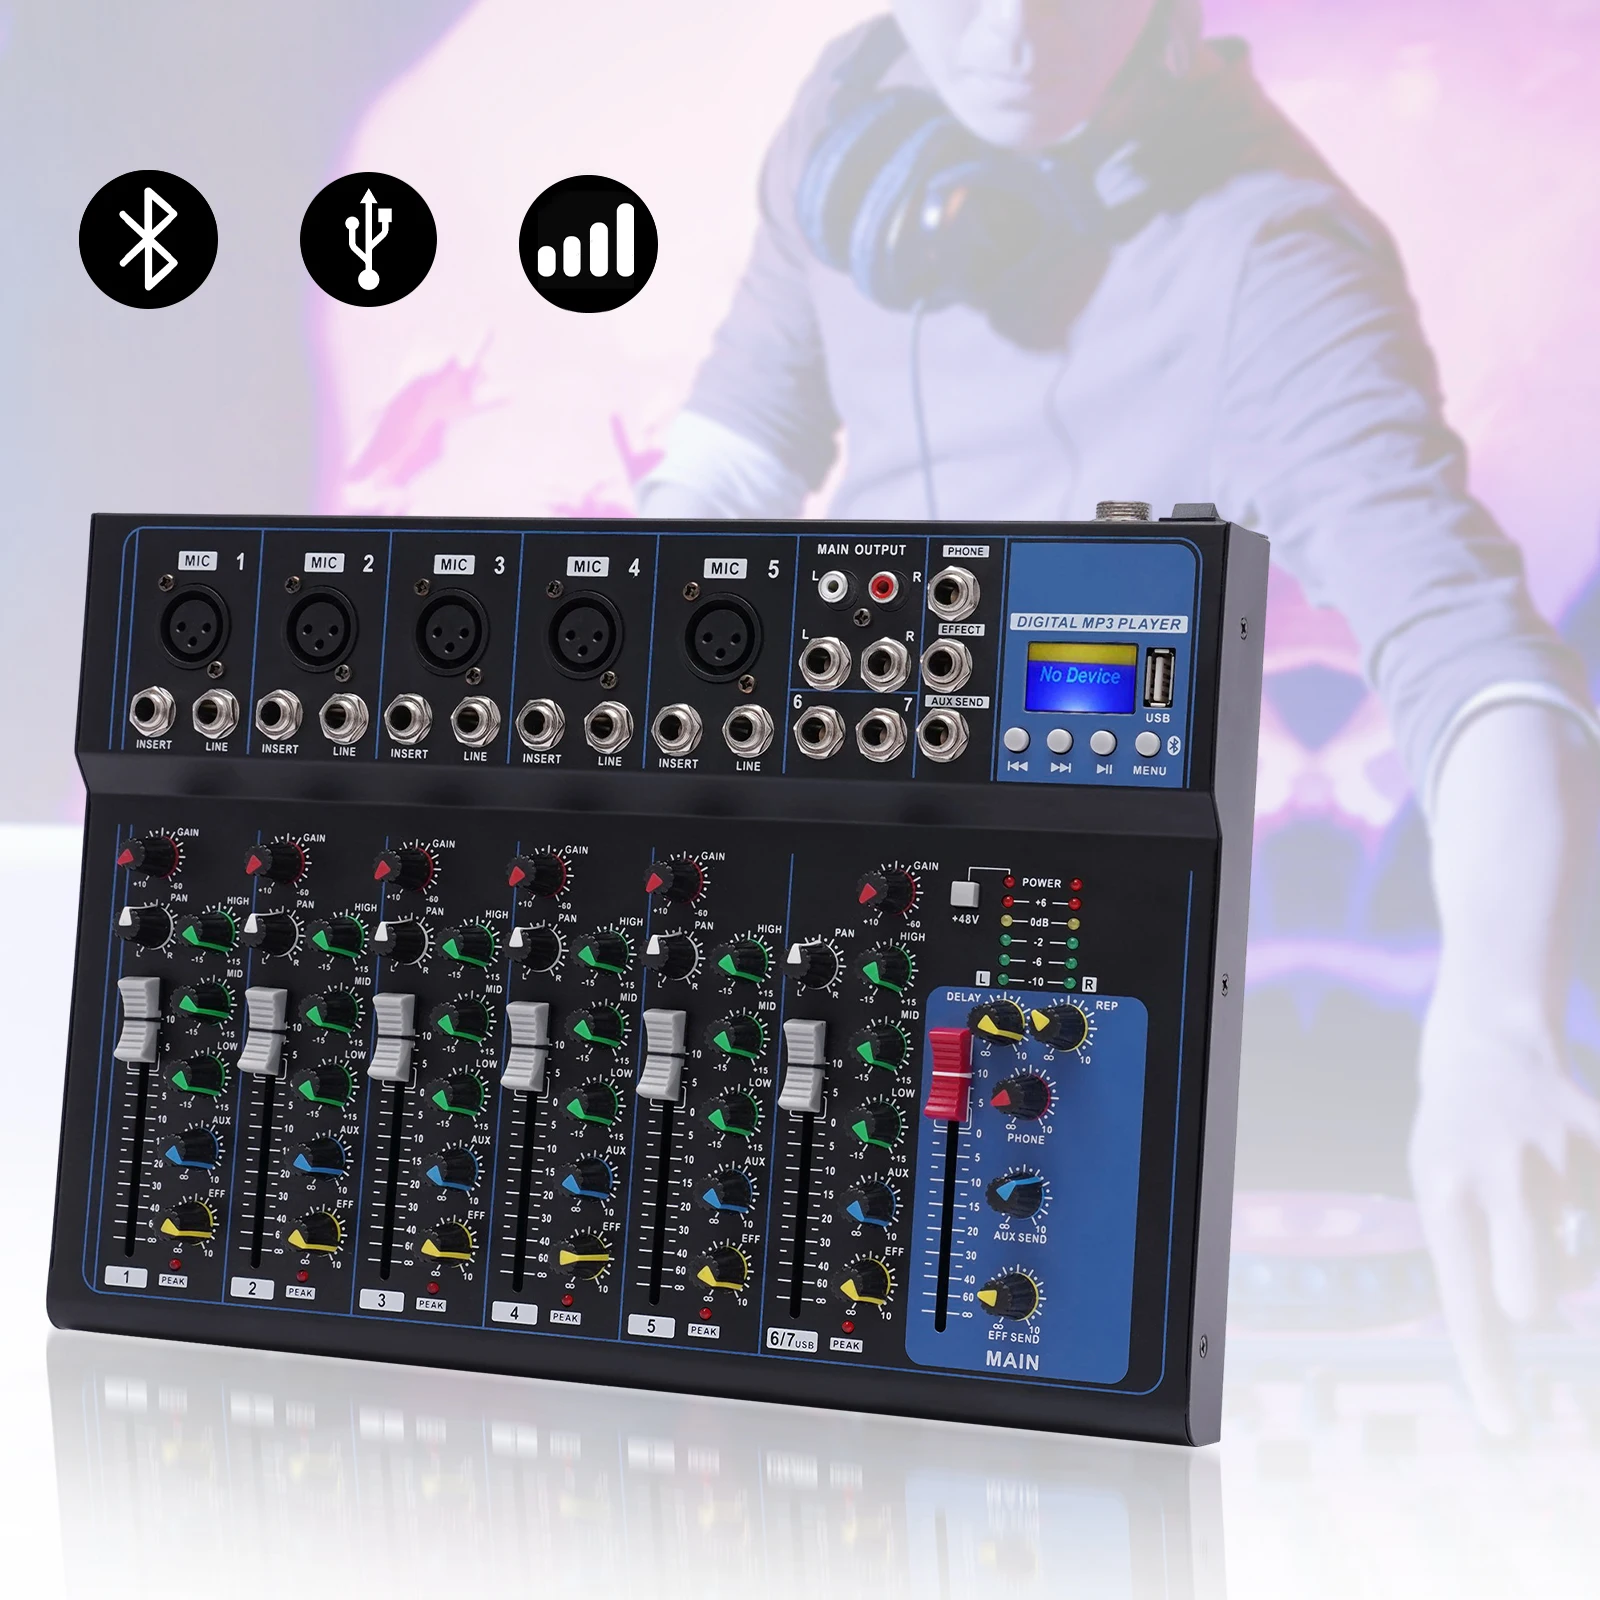 https://ae01.alicdn.com/kf/S5a34ee359d9545c3823c328546c5b06aF/Bluetooth-Portable-Audio-Mixer-with-USB-DJ-Sound-Mixing-Console-MP3-Jack-48V-Power-Computer-Recording.jpg